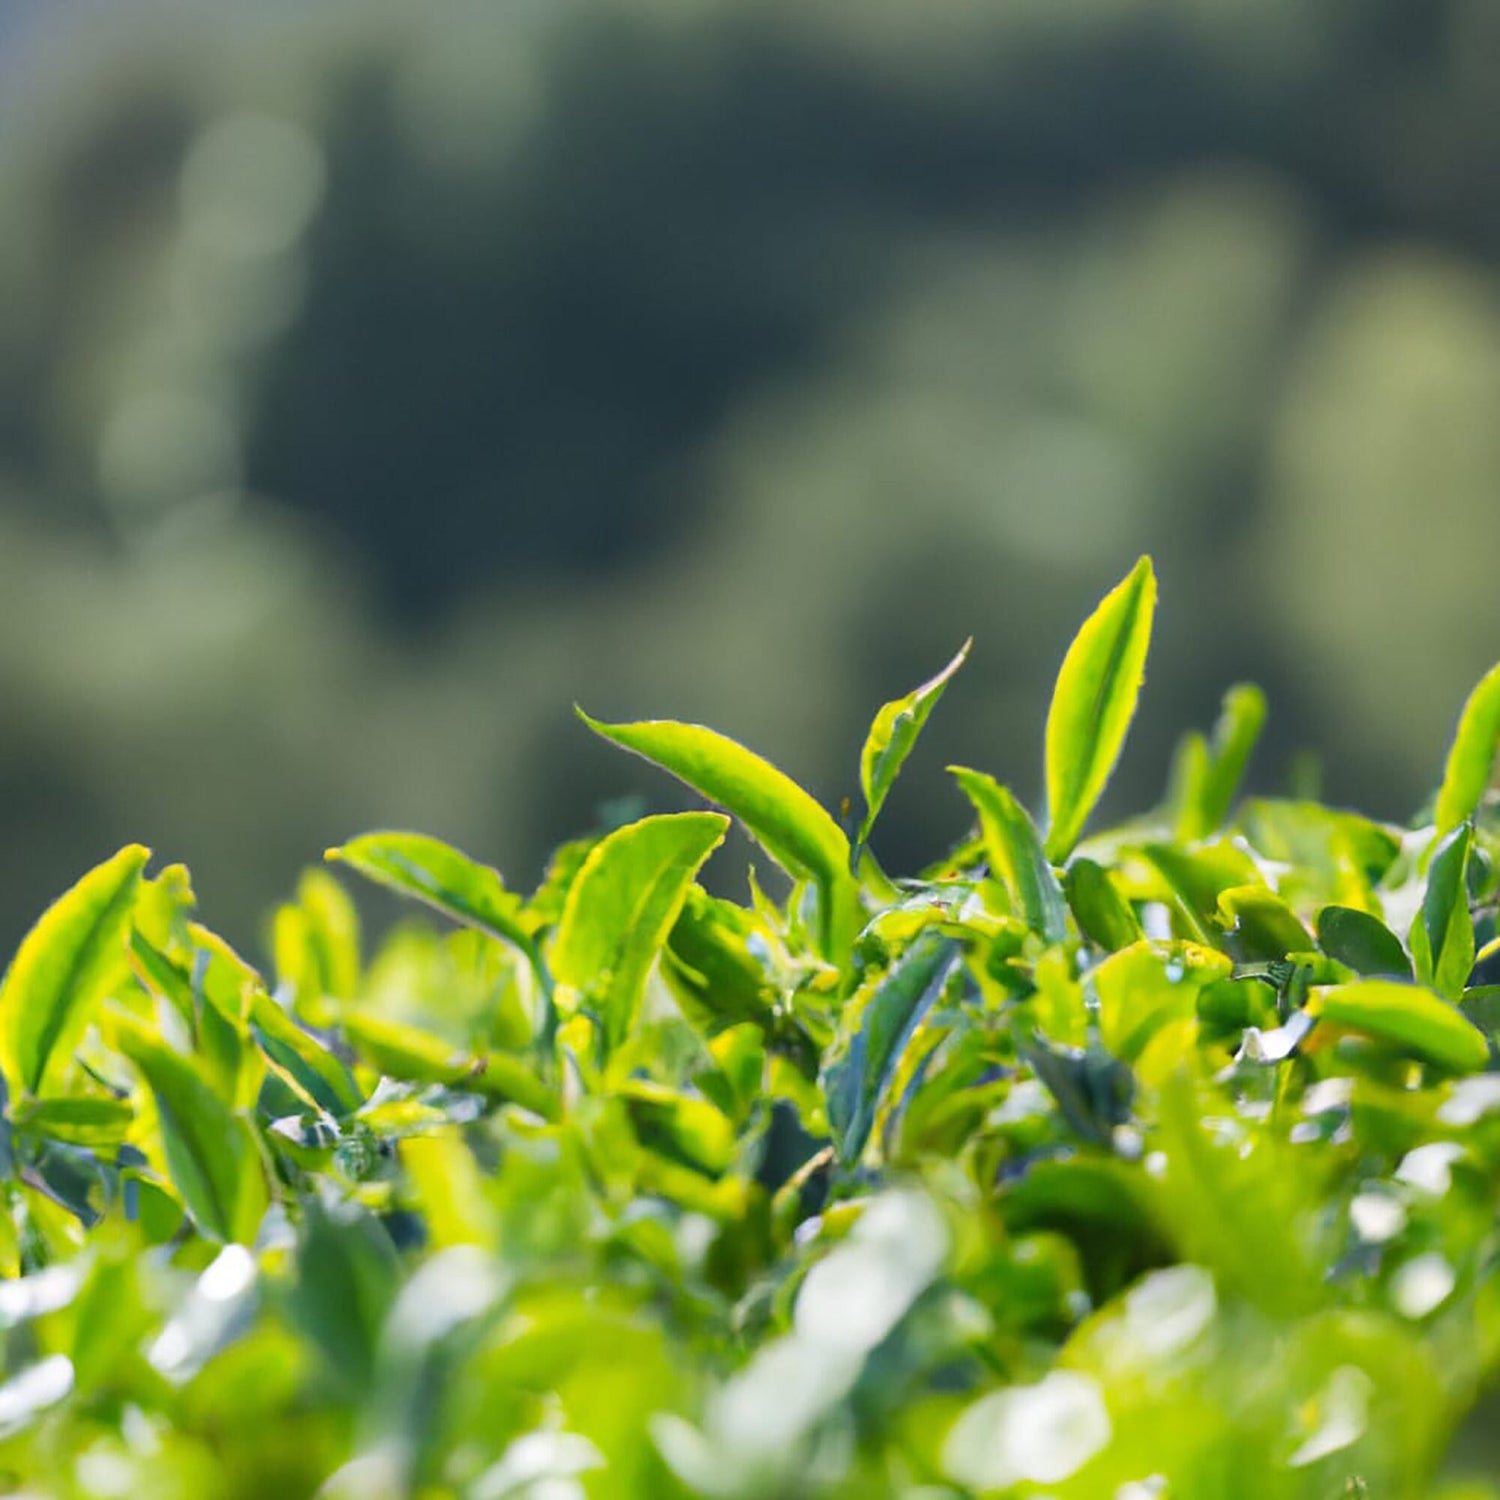 Lush green tea leaves basking in the sunlight, the source of high-quality loose leaf green tea, ready for careful hand-picking.